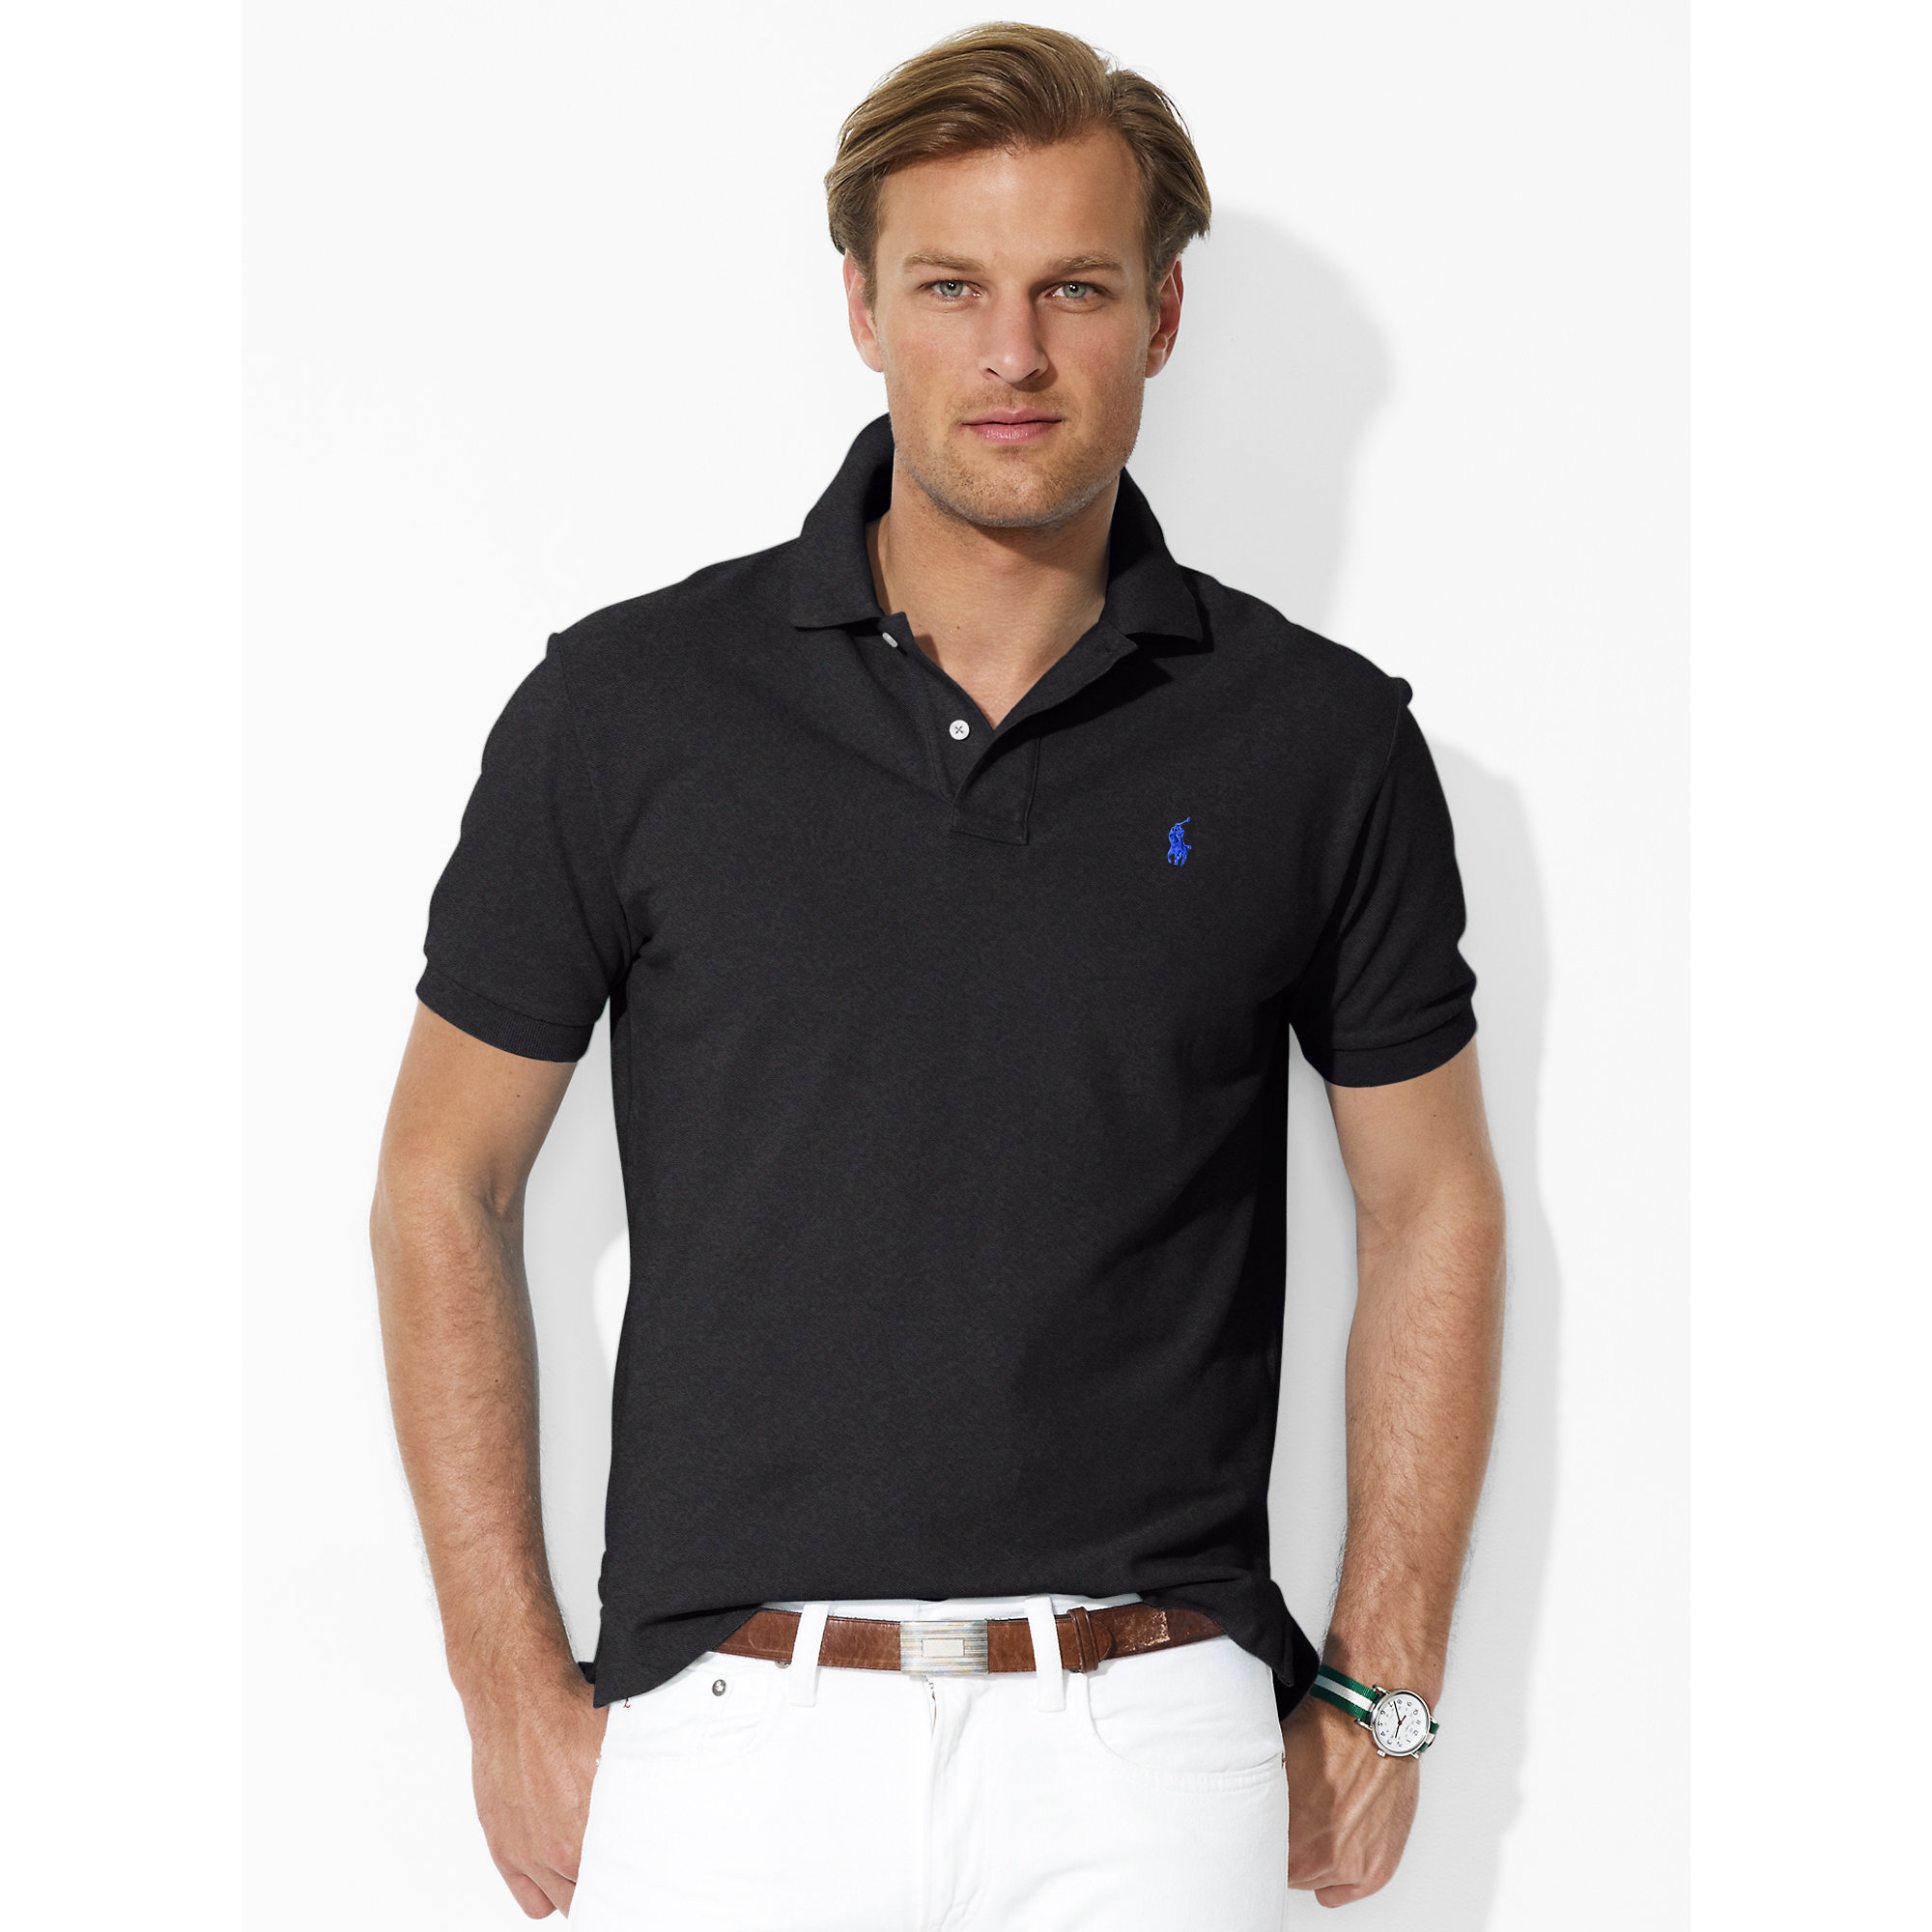 Polo Ralph Lauren Classic-fit Mesh Polo Shirt in Gray for Men - Lyst